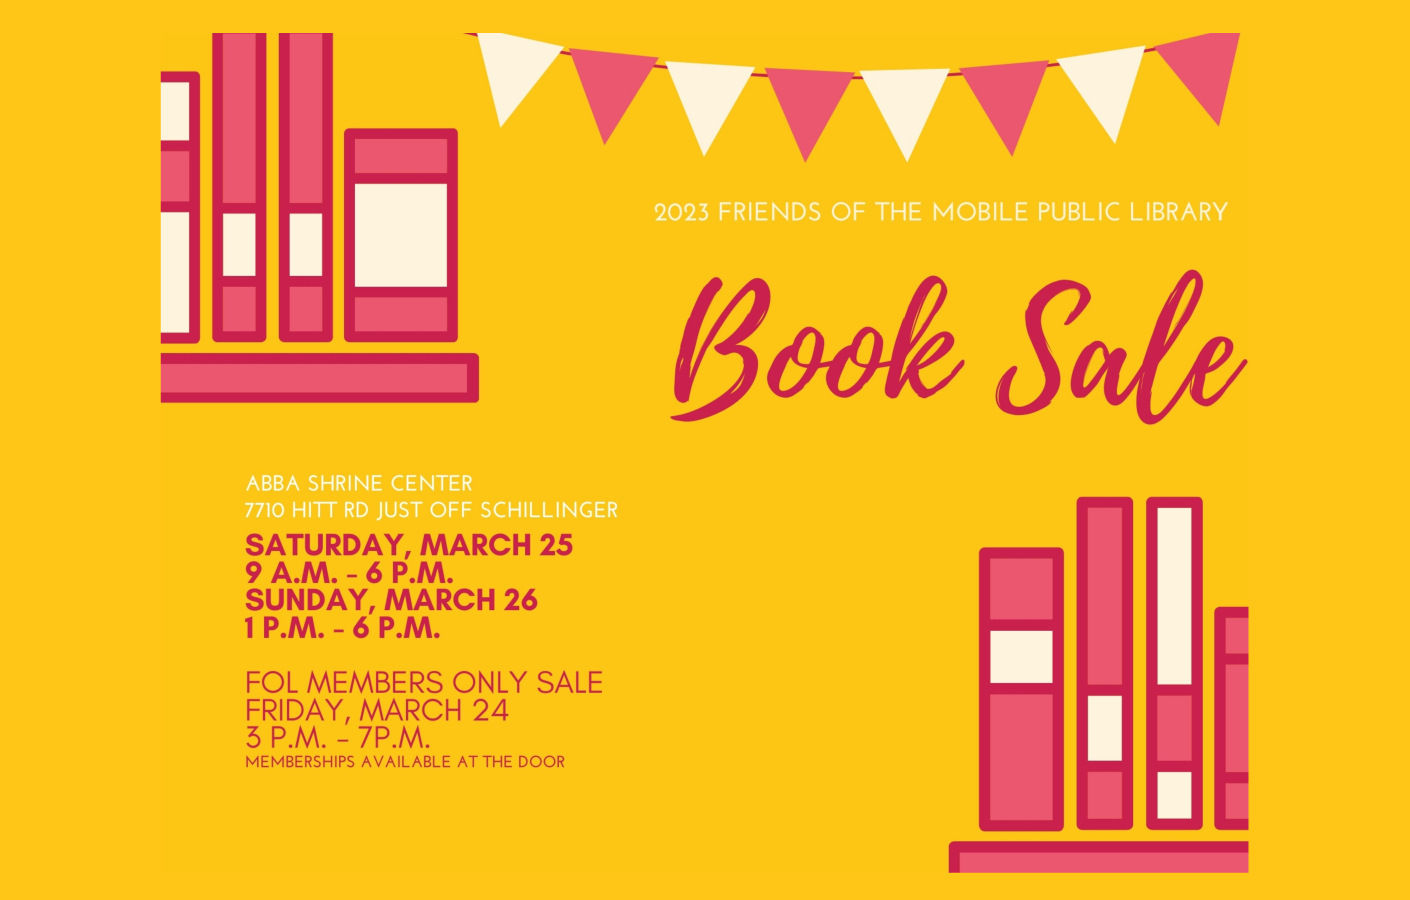 FRIENDS OF THE MOBILE PUBLIC LIBRARY BOOK SALE